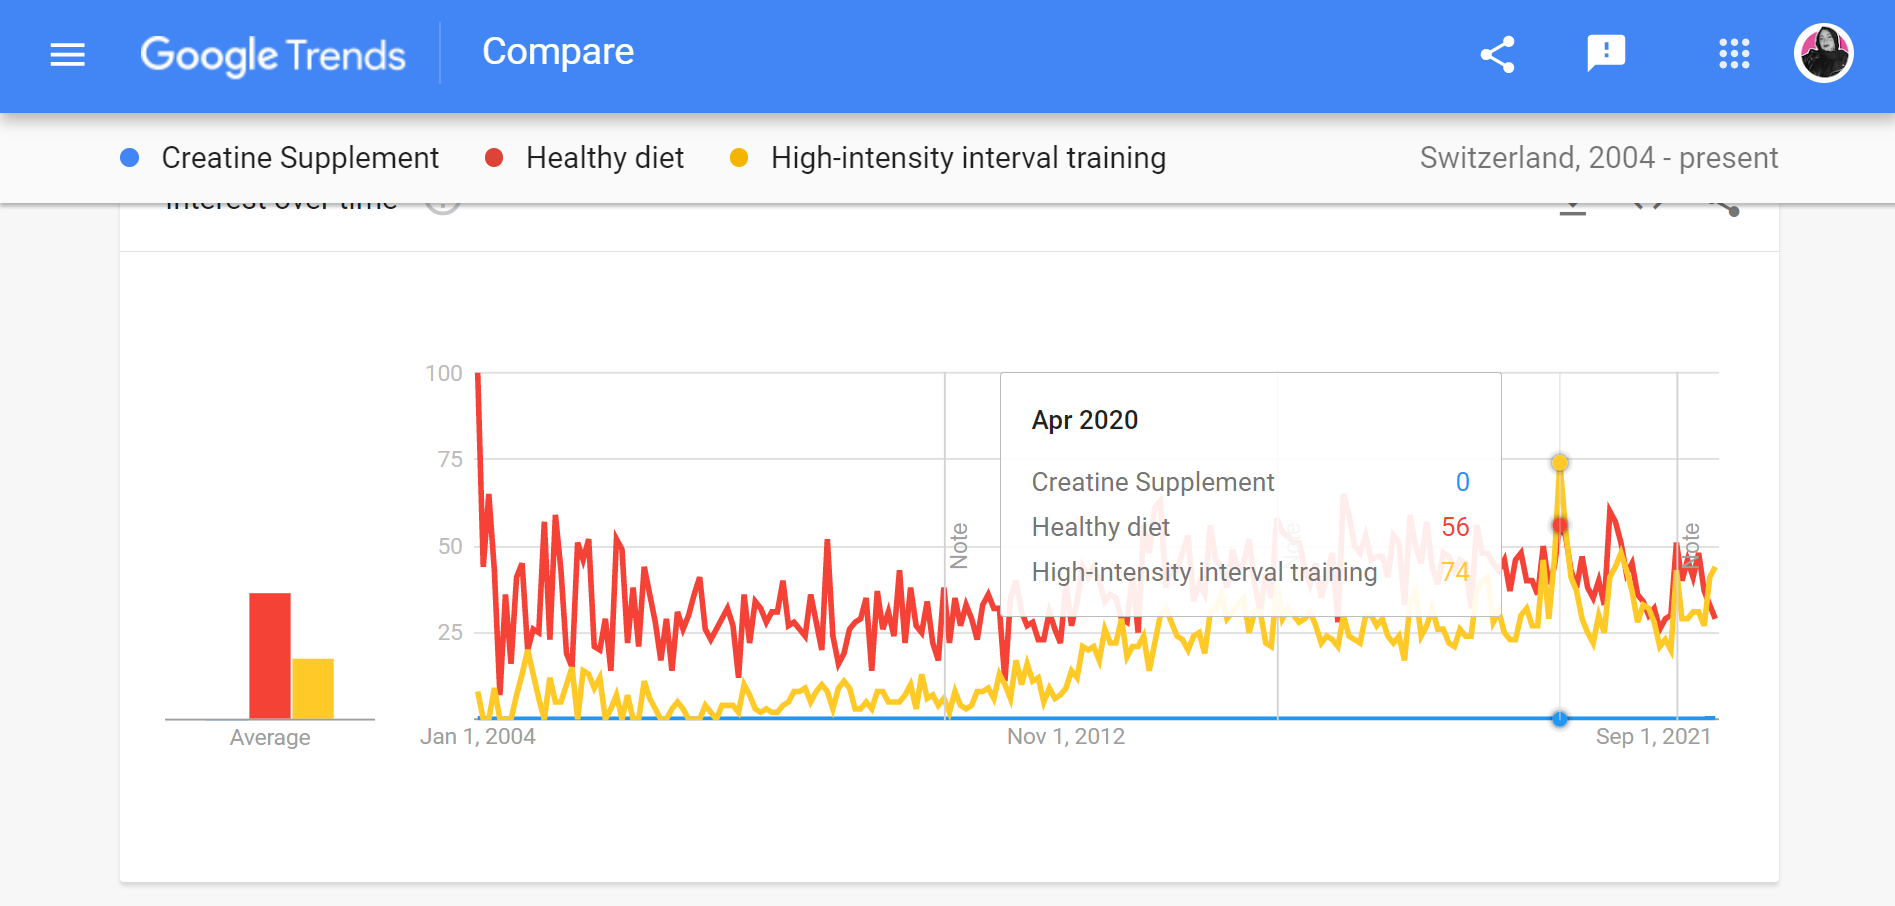 A Comparison Between The Search Interest In Sub-Topics Related To Physical Fitness (&Quot;Creative Supplement&Quot;, &Quot;Healthy Diet&Quot;, And &Quot;High-Intensity Interval Training (Hiit)&Quot;) In April 2020